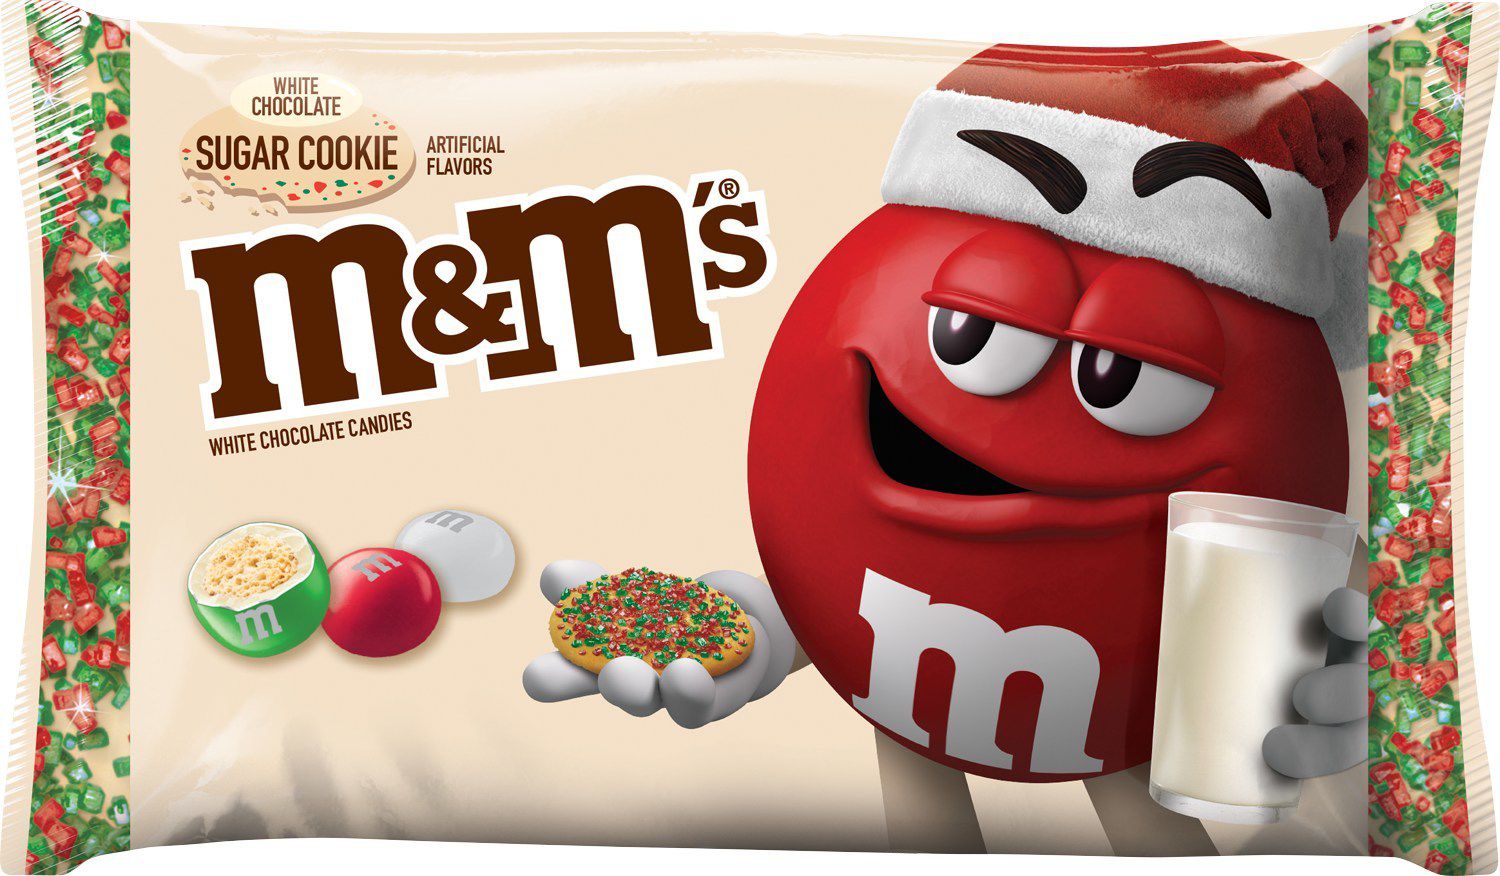 Finally, M&M'S new White Chocolate Sugar Cookie flavor is on store